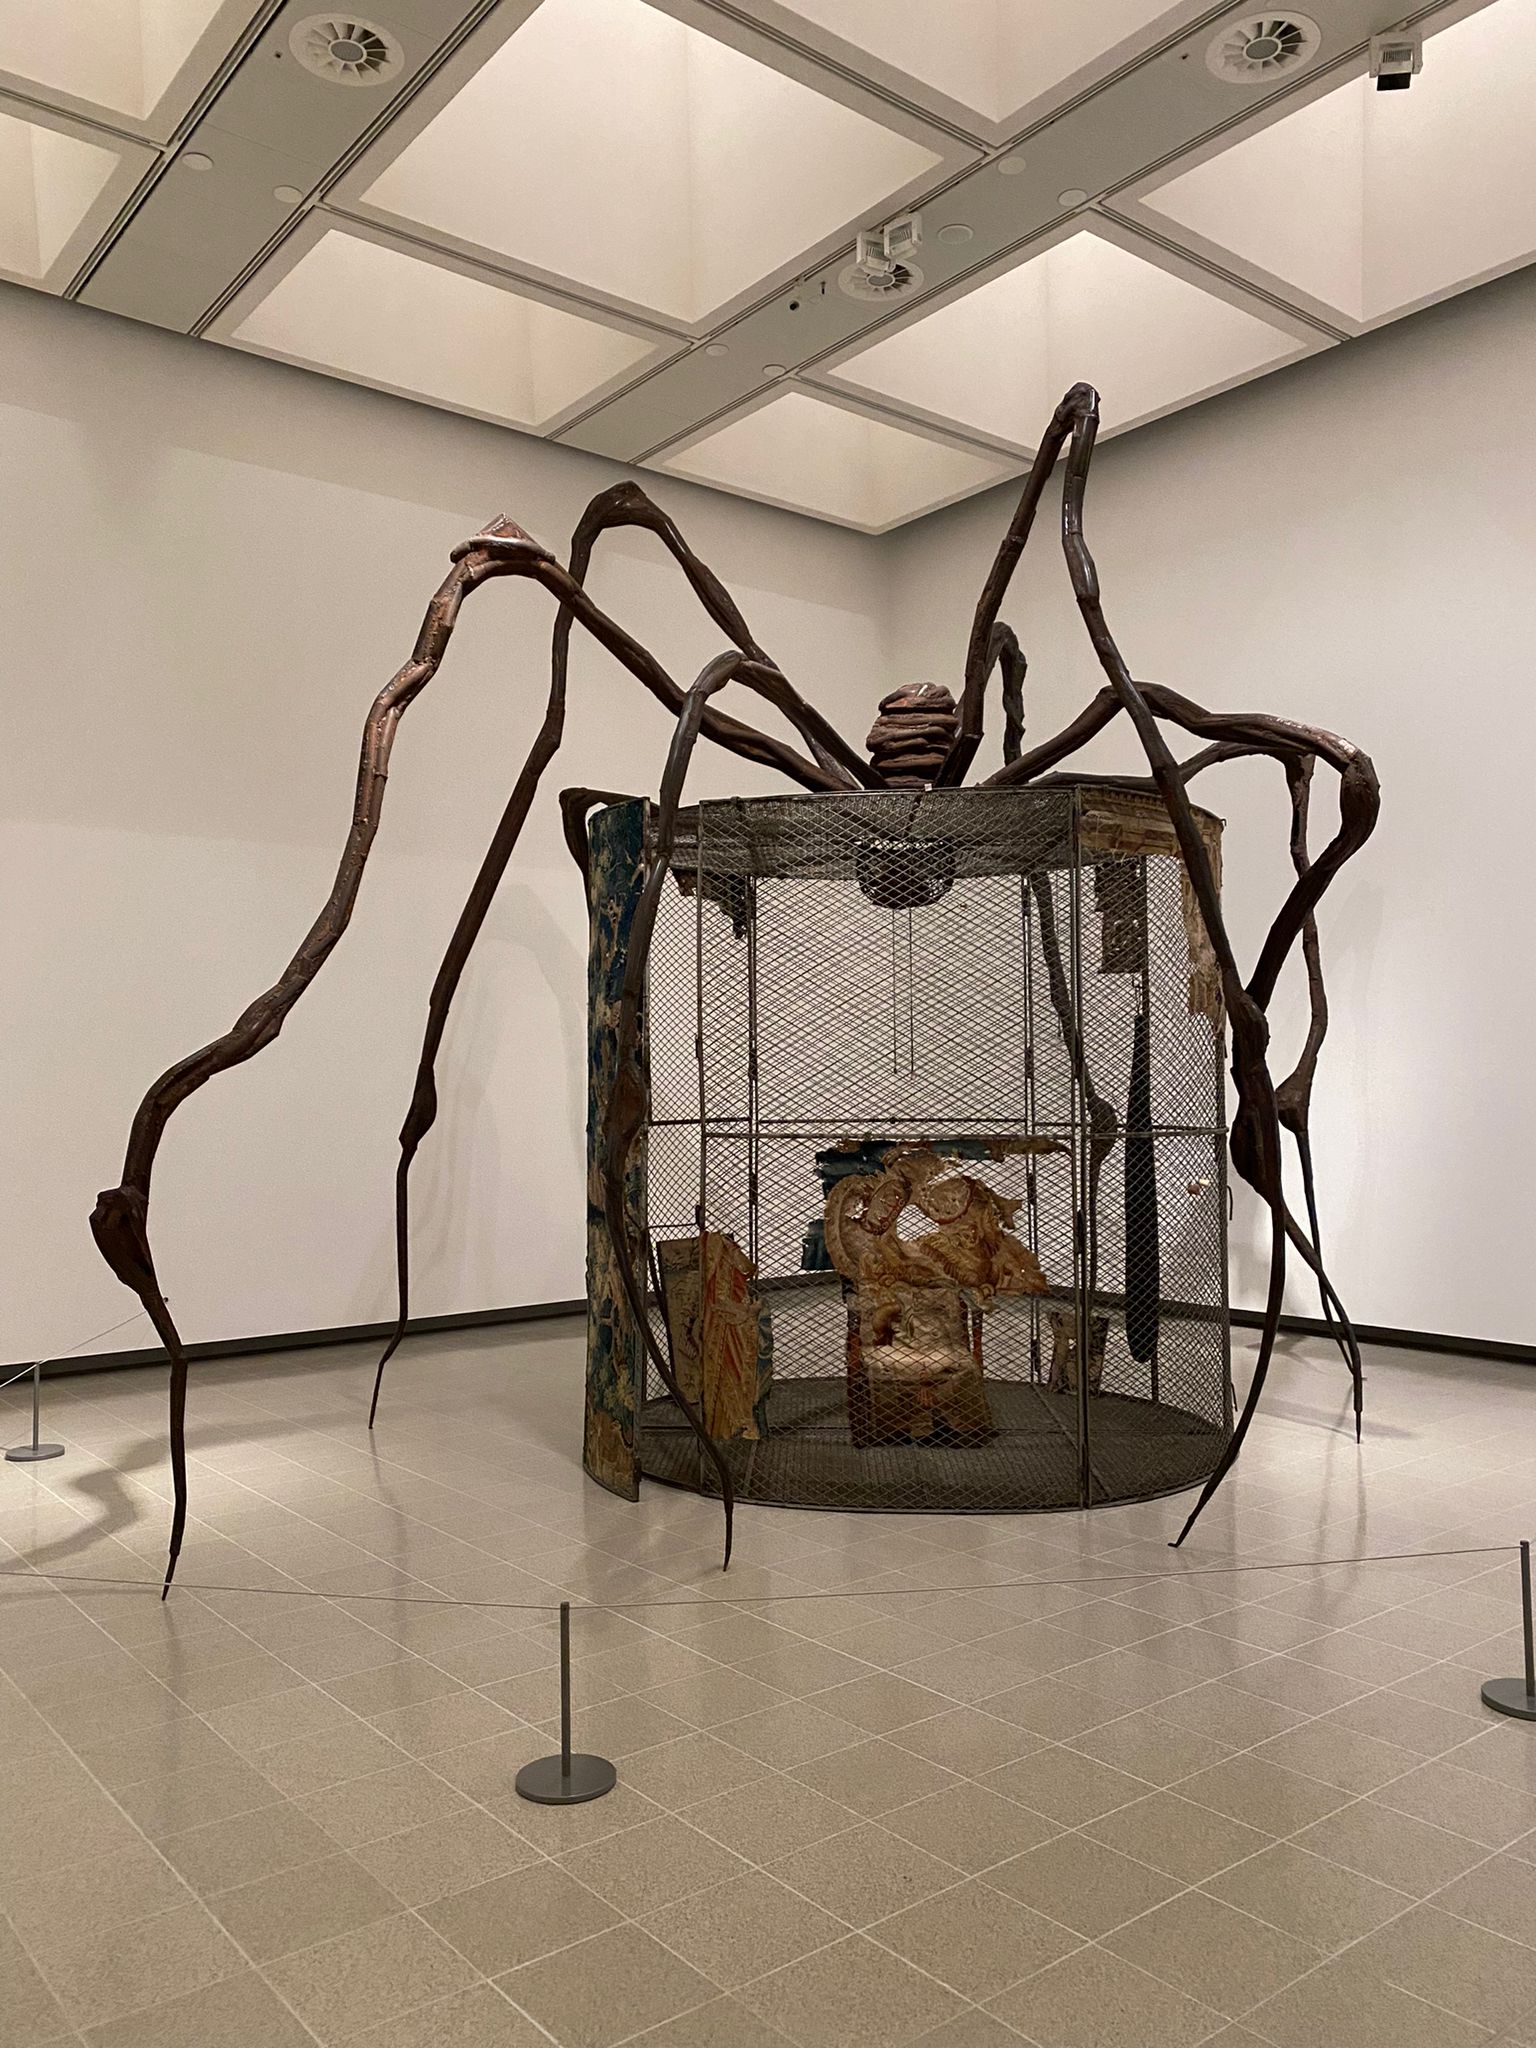 Louise Bourgeois: The Woven Child, Hayward Gallery review - the